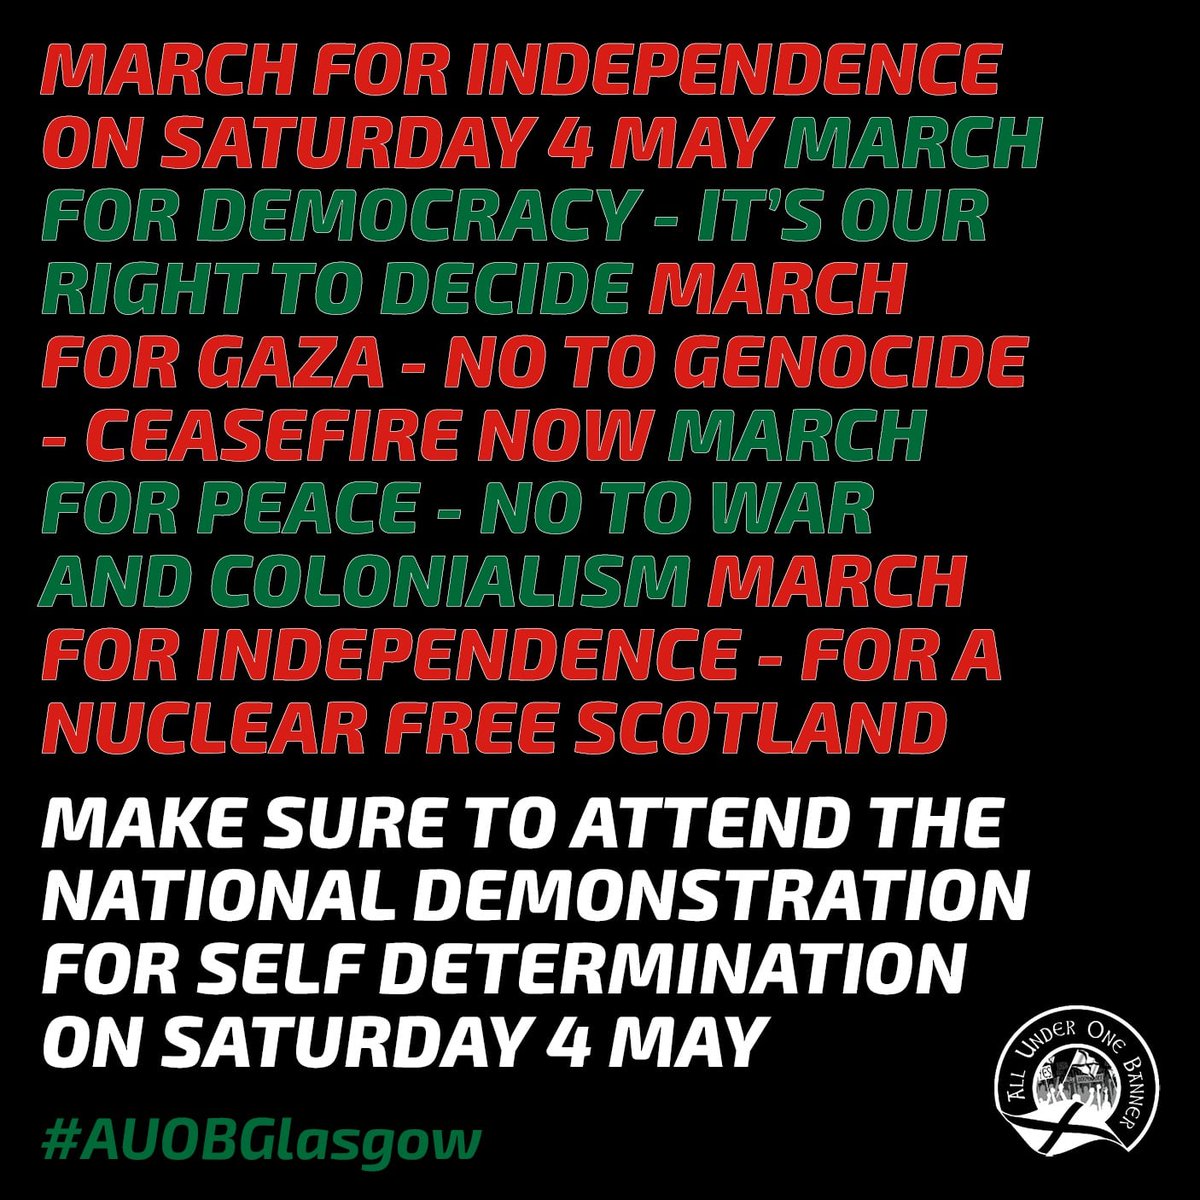 MARCH FOR INDEPENDENCE 🏴󠁧󠁢󠁳󠁣󠁴󠁿
GLASGOW - SATURDAY 4 MAY
#AUOBGlasgow